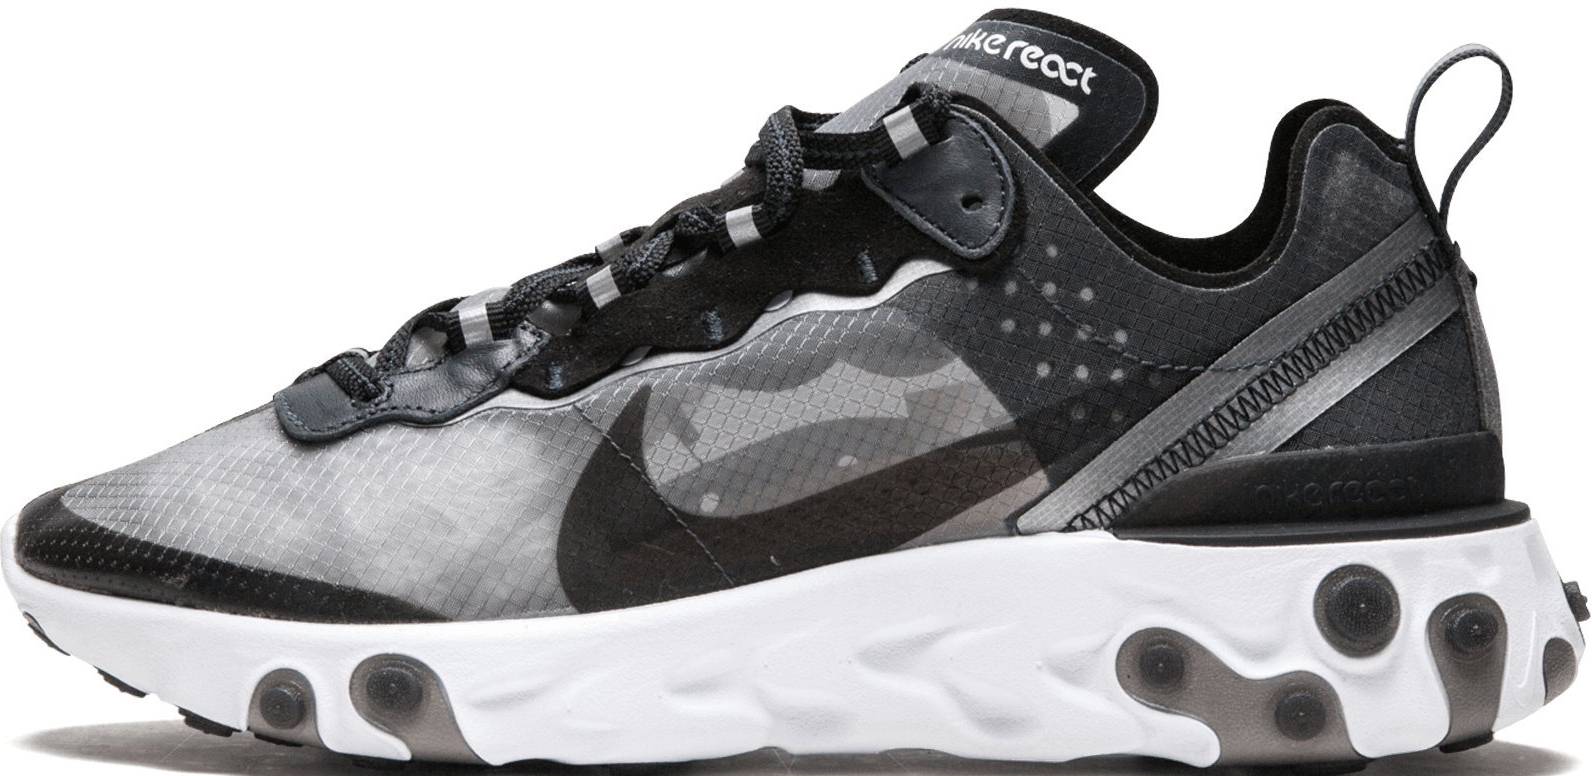 Diplomaat Feodaal medley Nike React Element 87 Review, Facts, Comparison | RunRepeat